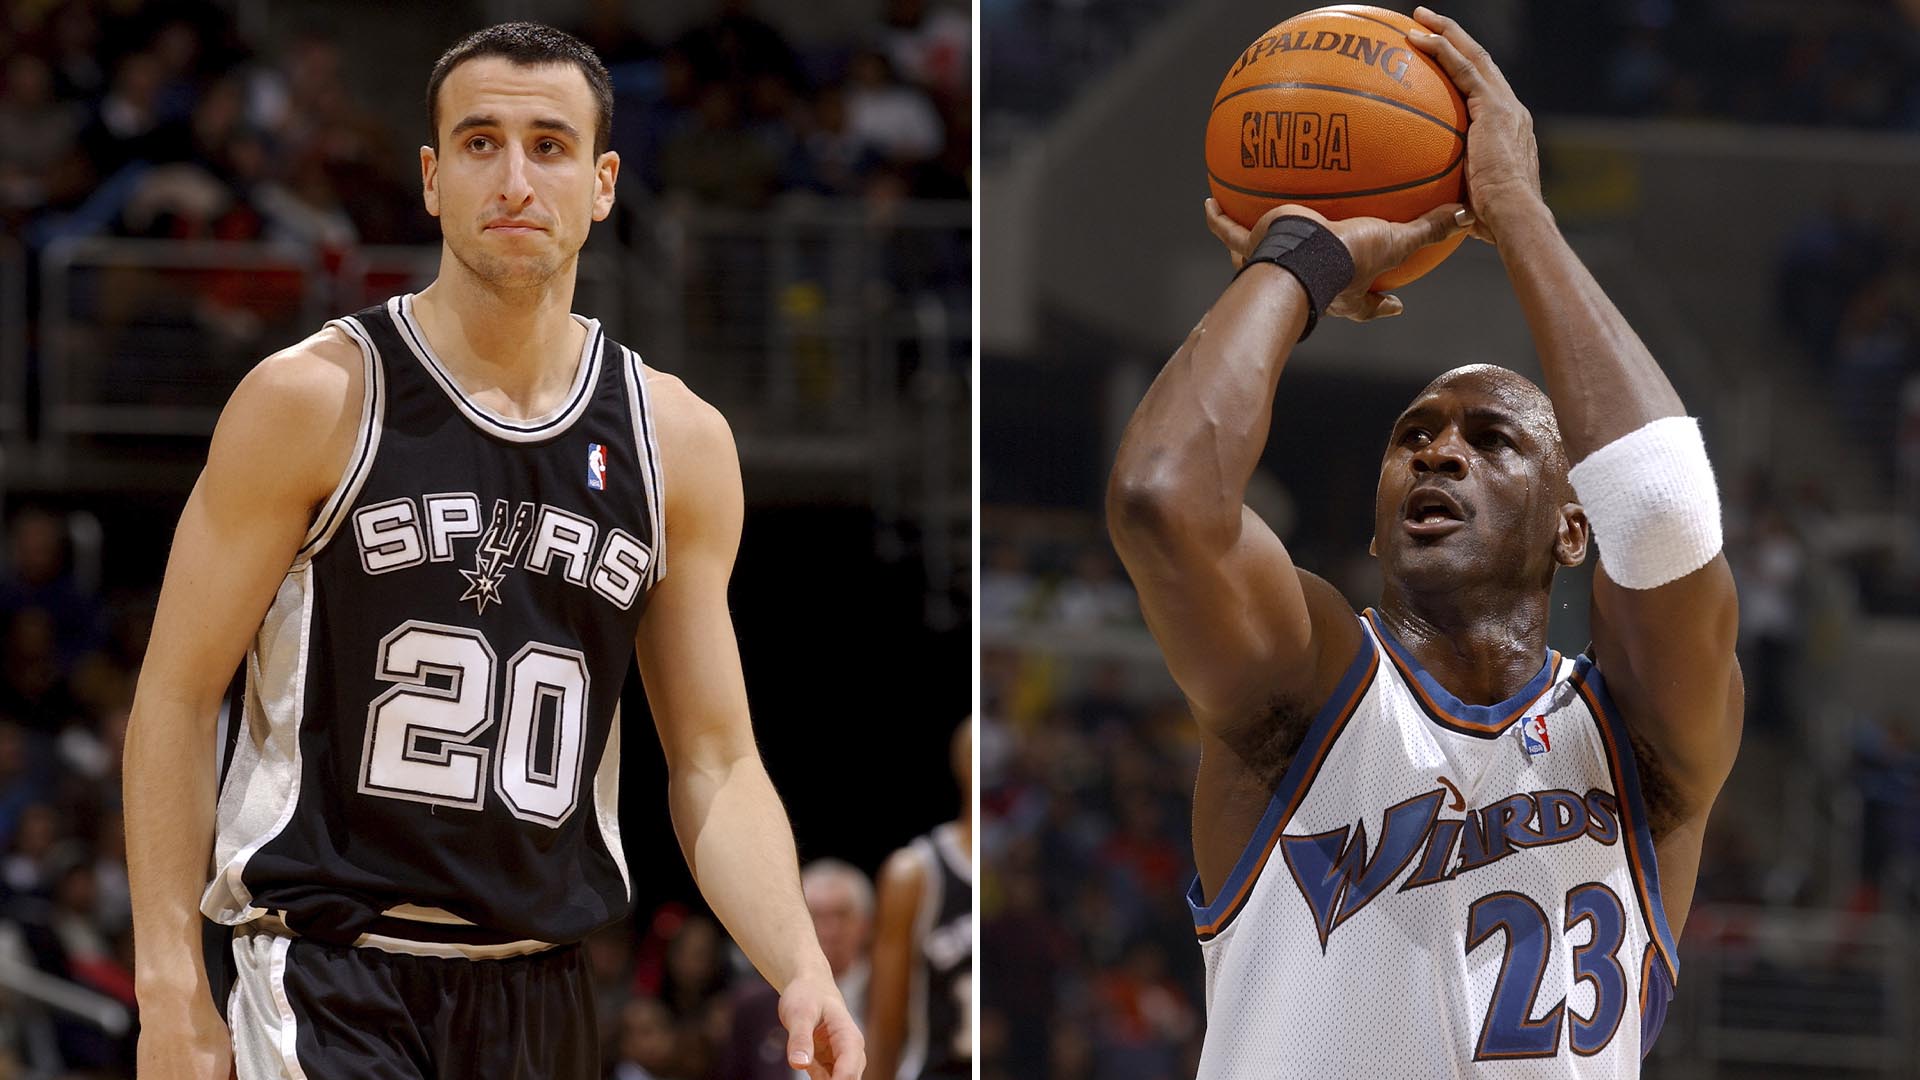 The only game jordan and ginobili shared in the nba was in december 2002.